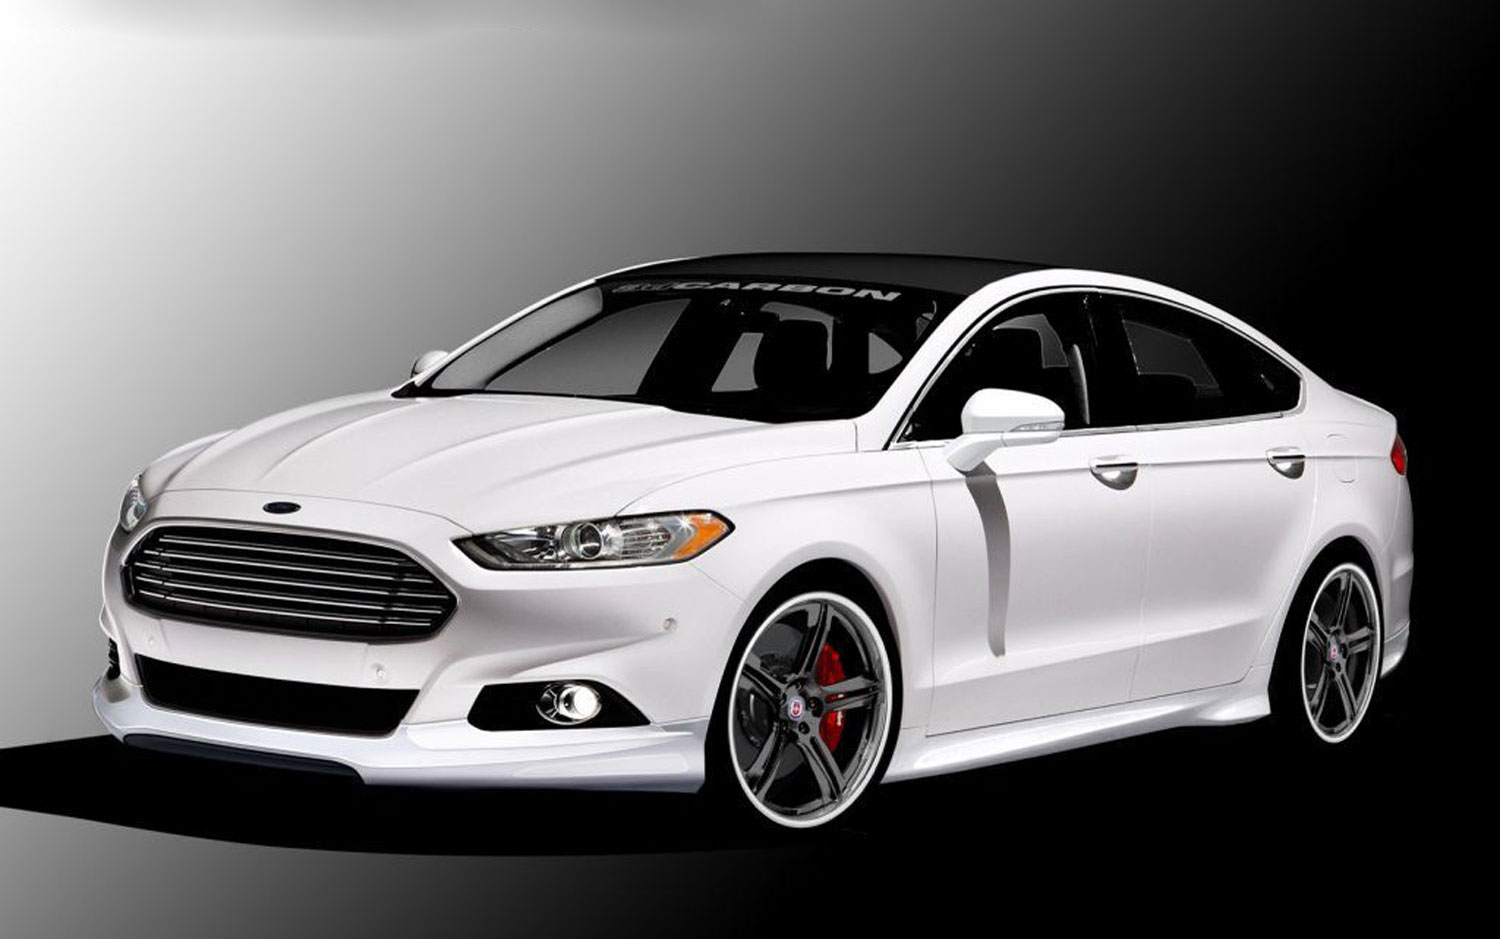 Cars Model 2013 2014: 2013 Ford Fusion